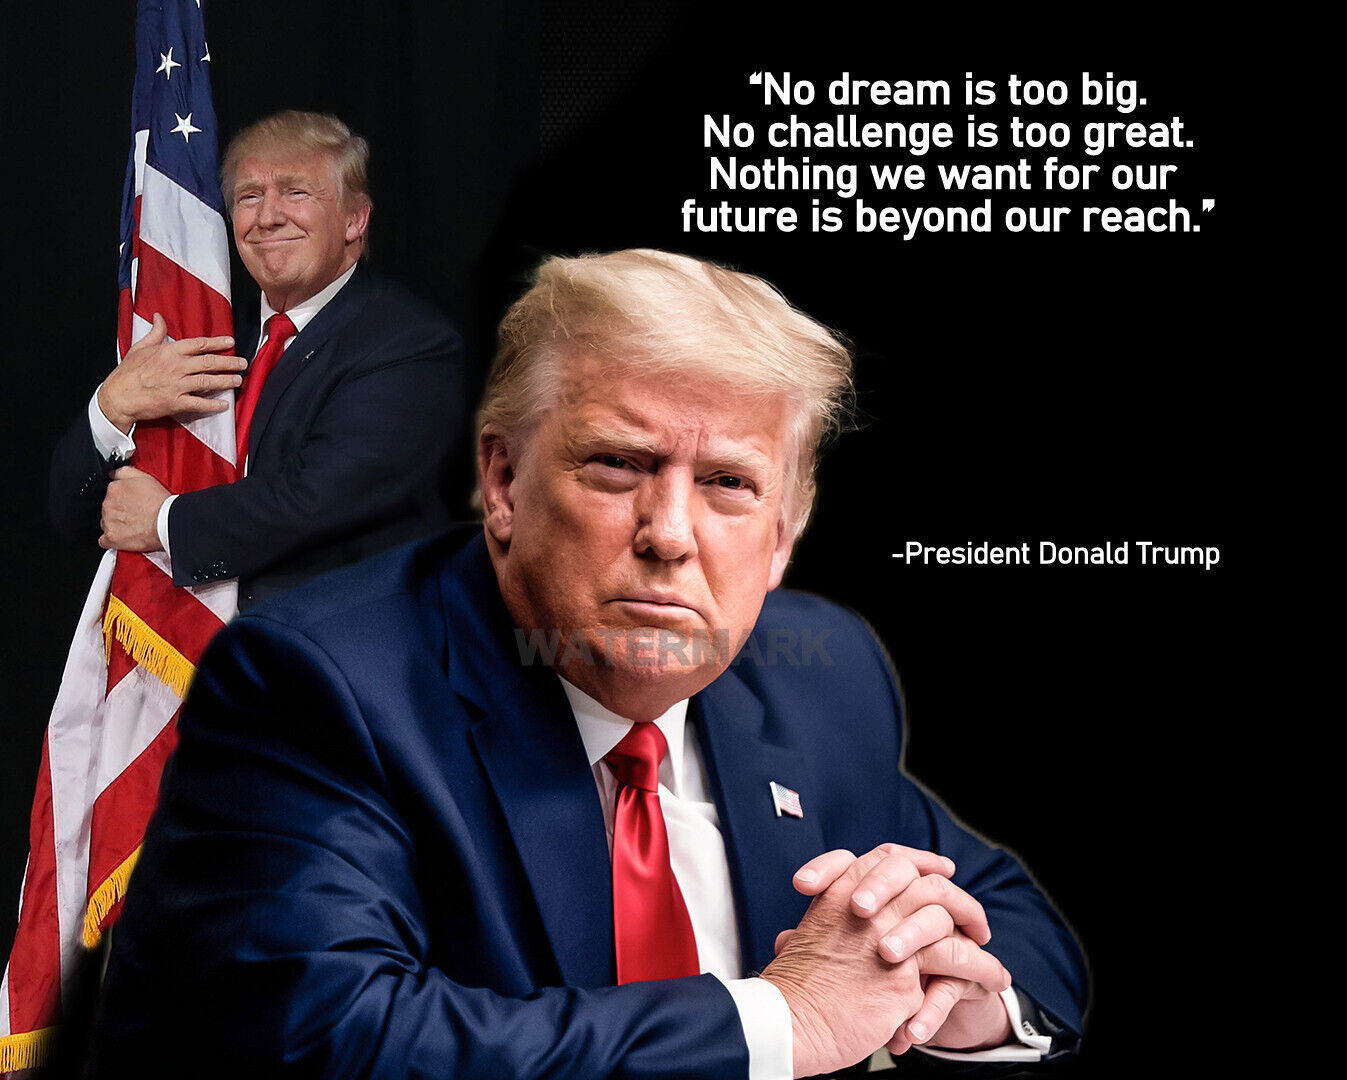 Primary image for PRESIDENT DONALD TRUMP QUOTE NO DREAM IS TOO BIG PUBLICITY PHOTO 8x10